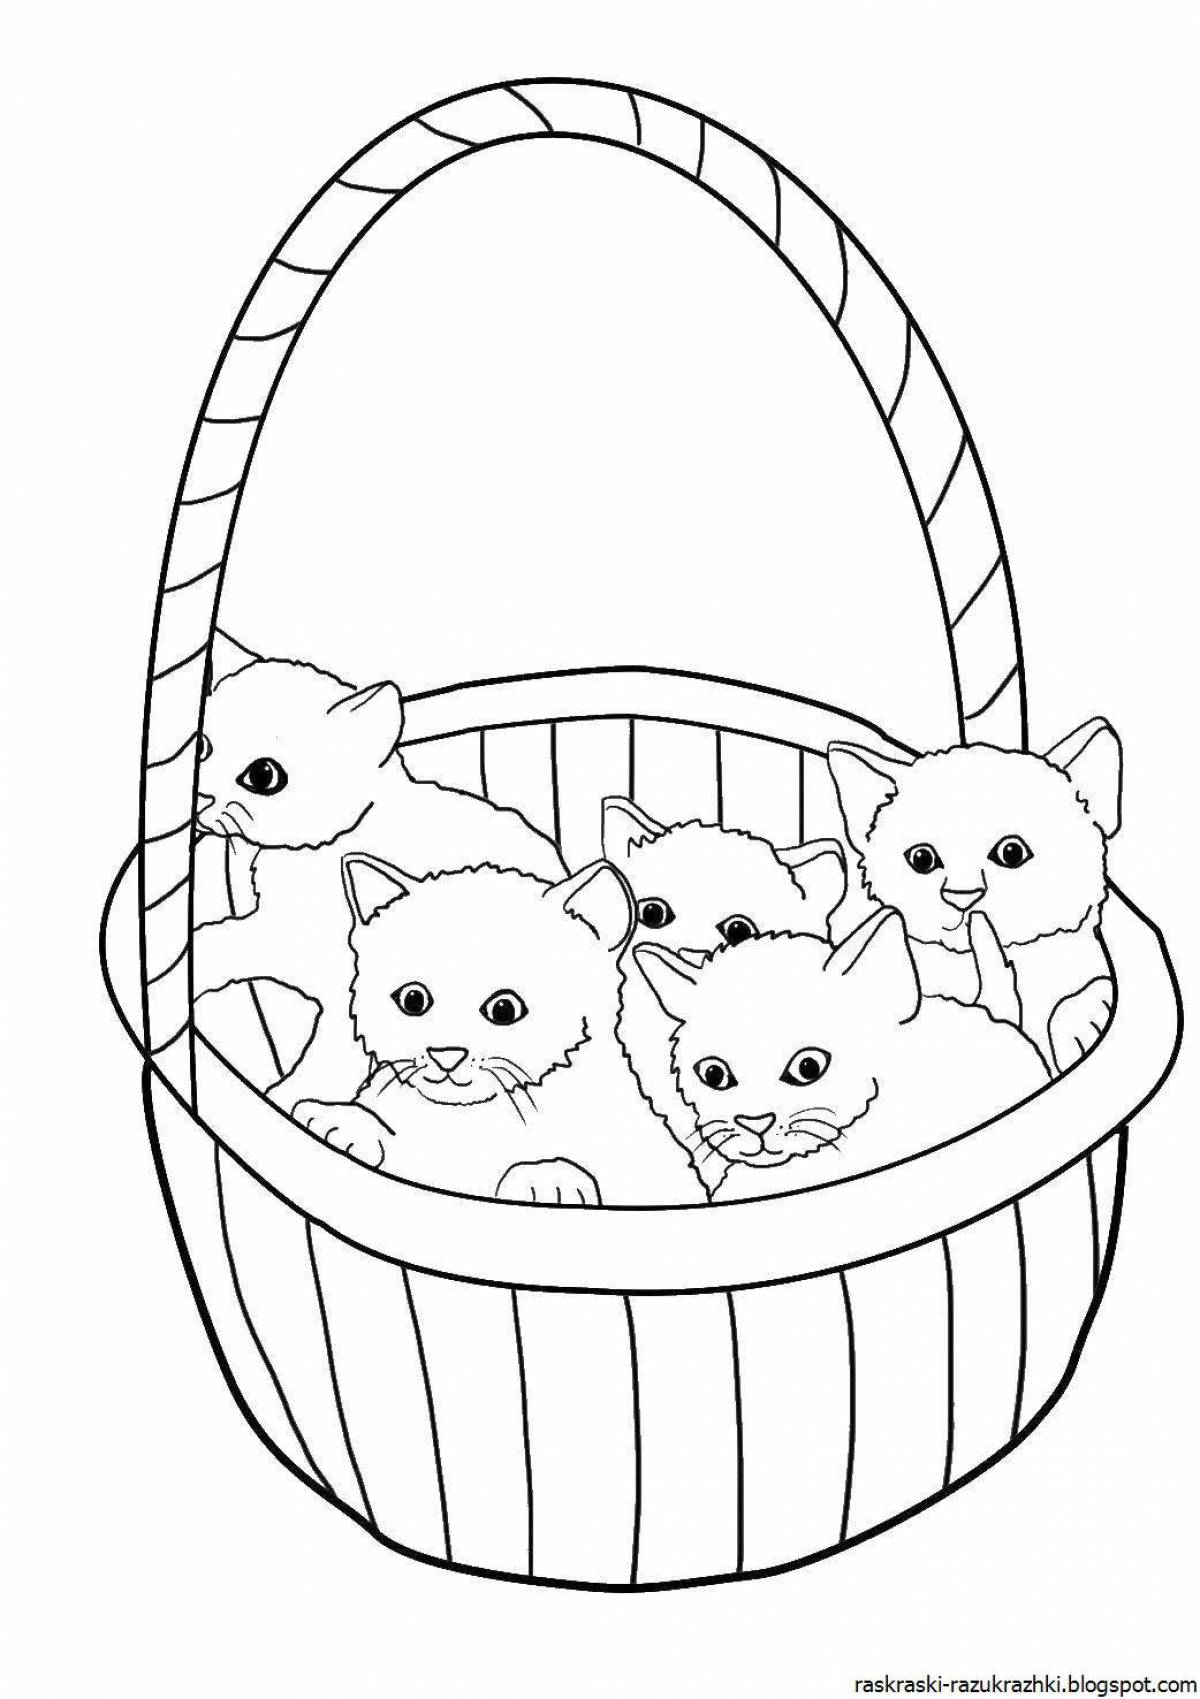 Soft cat coloring for kids